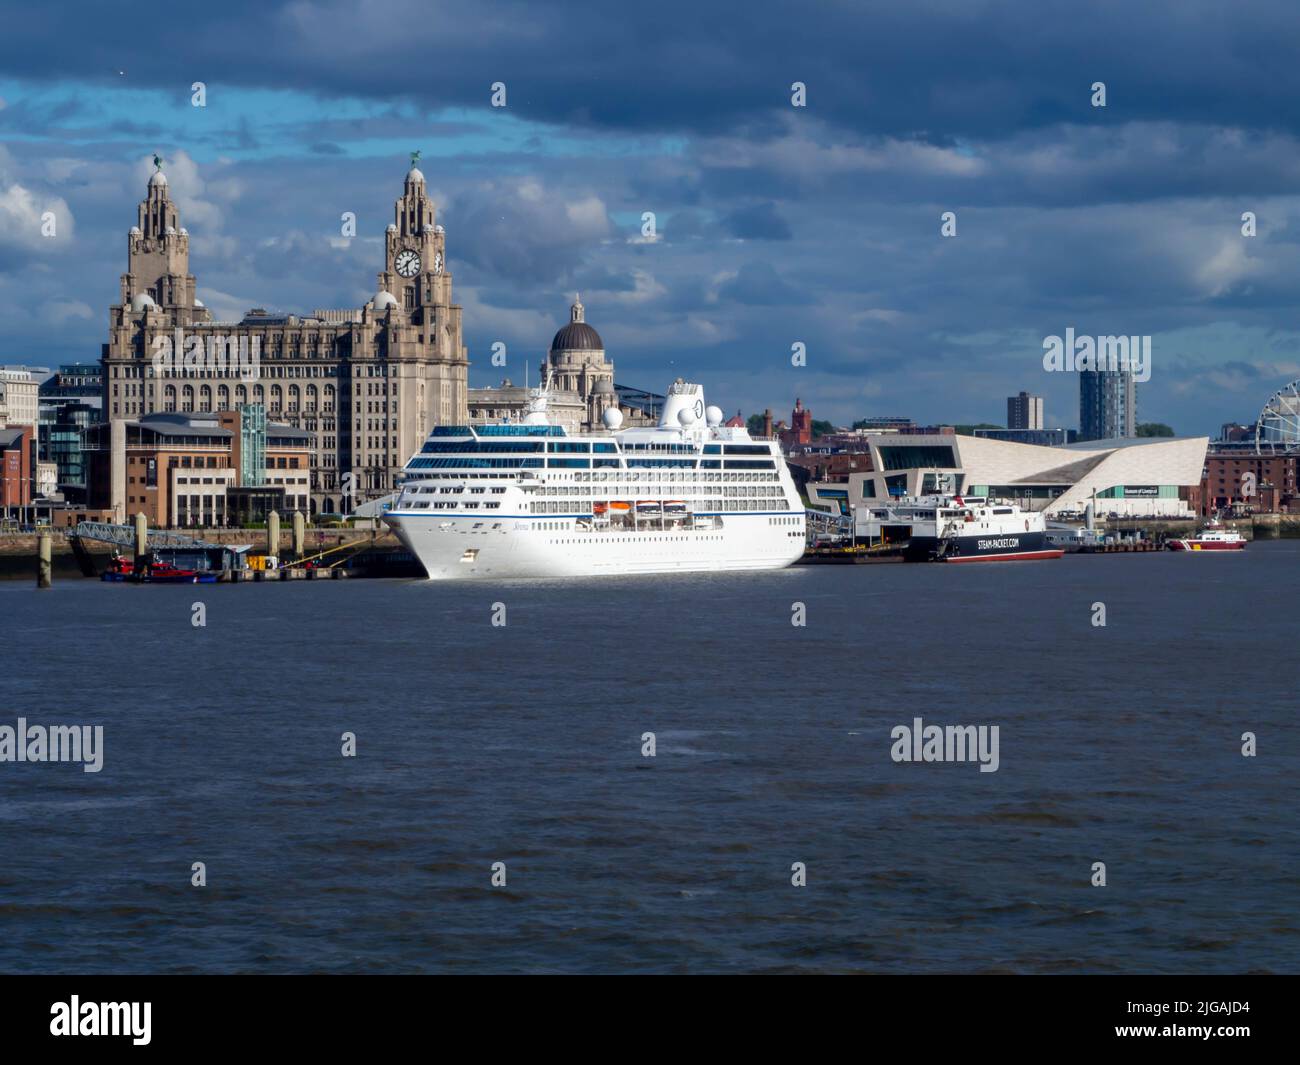 Liverpool Docks, where history and modern combine, to give an iconic landscape and welcome to the port. Stock Photo